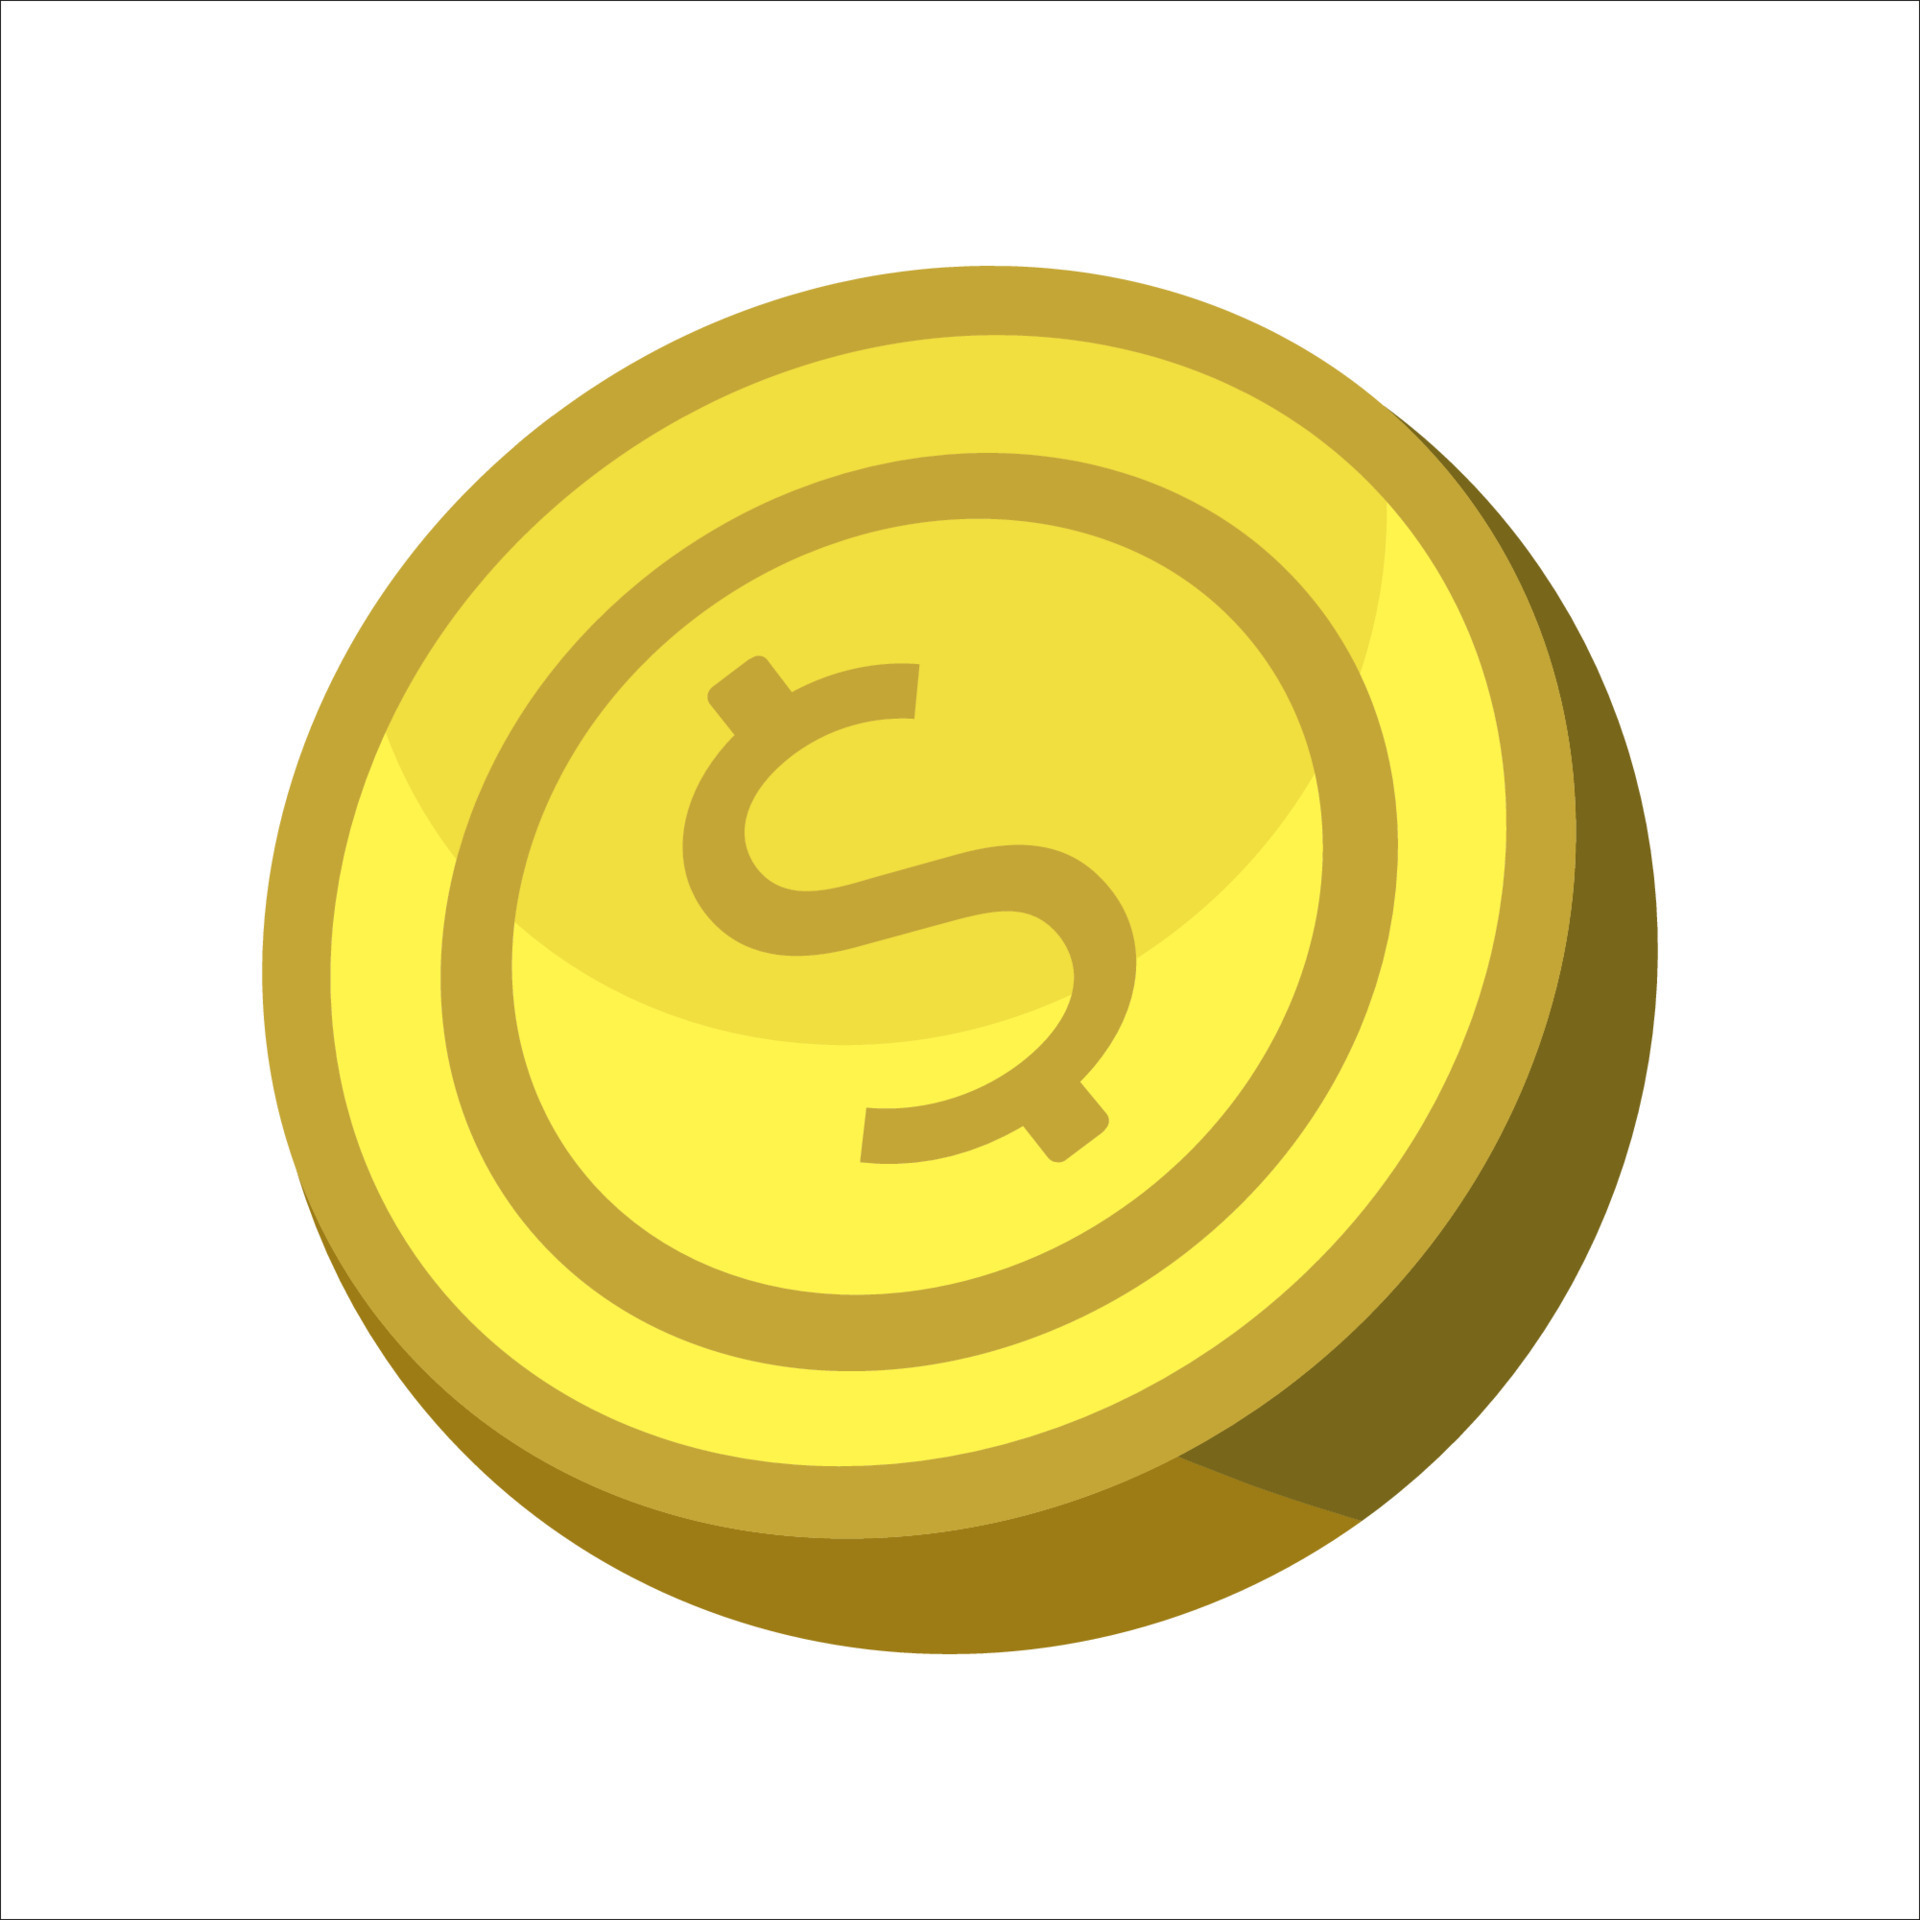 Gold coin icon. With dollar sign. Vector illustration isolated on white ...